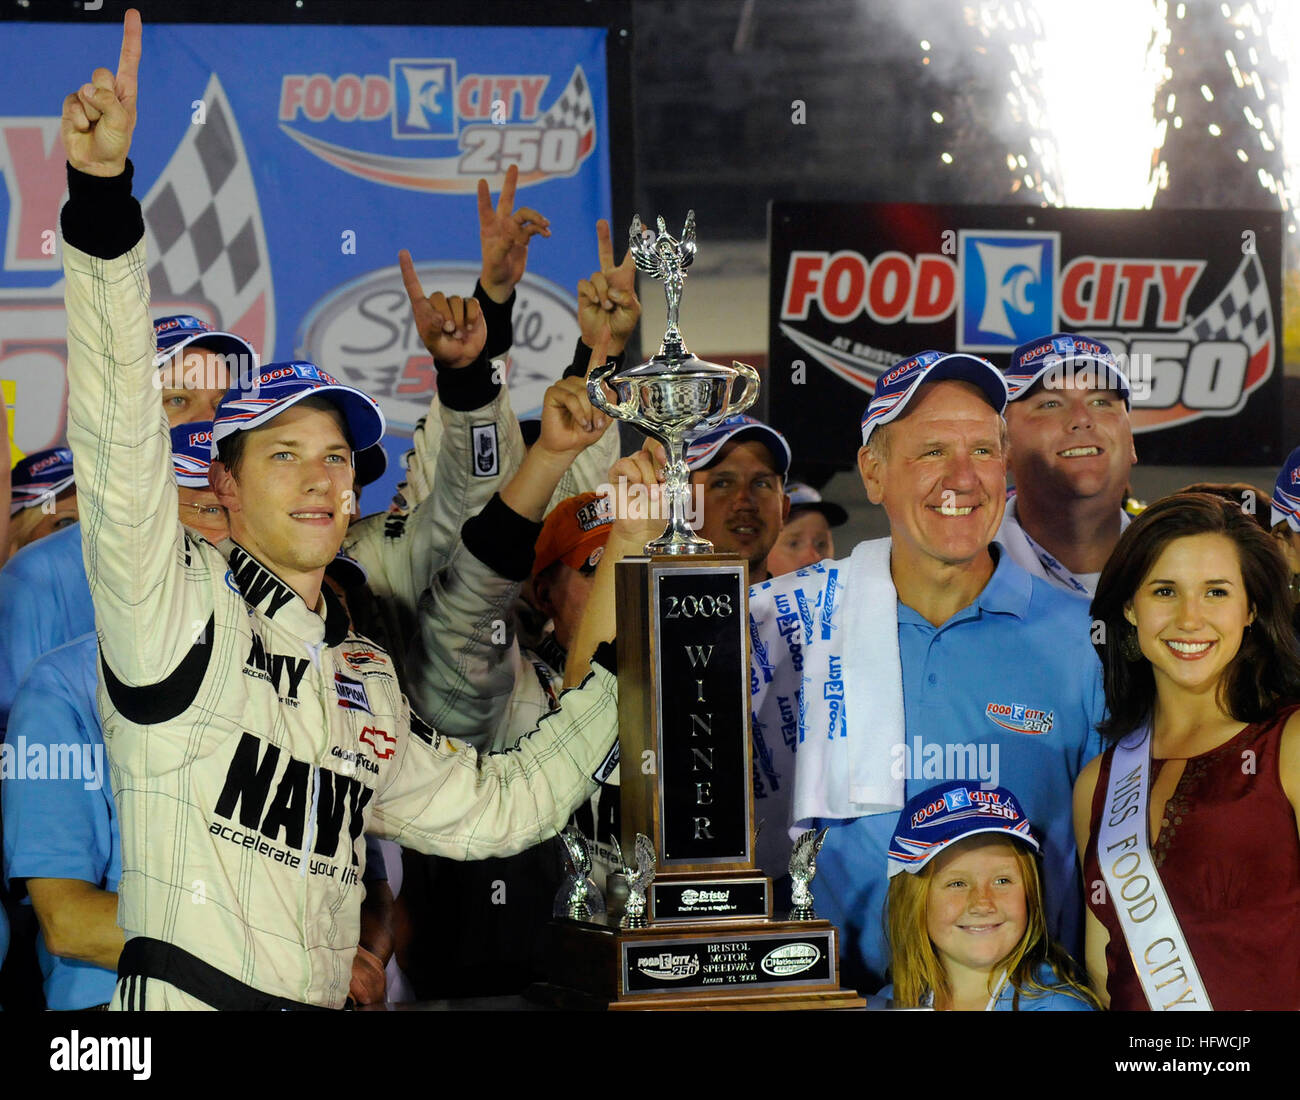 080822-N-5345W-234  BRISTOL, Tenn. (Aug. 22, 2008) JR Motorsports driver Brad Keselowski celebrates along with teammates and Food City employees in victory lane after piloting the No. 88 U.S. Navy Chevrolet Monte Carlo to a first place finish in the NASCAR Nationwide Series Food City 250 at Bristol Motor Speedway in Bristol. Keselowski overcame a 37th place starting position to claim his second career victory and won second place overall in the nationwide championship standings. (U.S. Navy photo by Mass Communication Specialist 2nd Class Kristopher S. Wilson/Released) US Navy 080822-N-5345W-23 Stock Photo